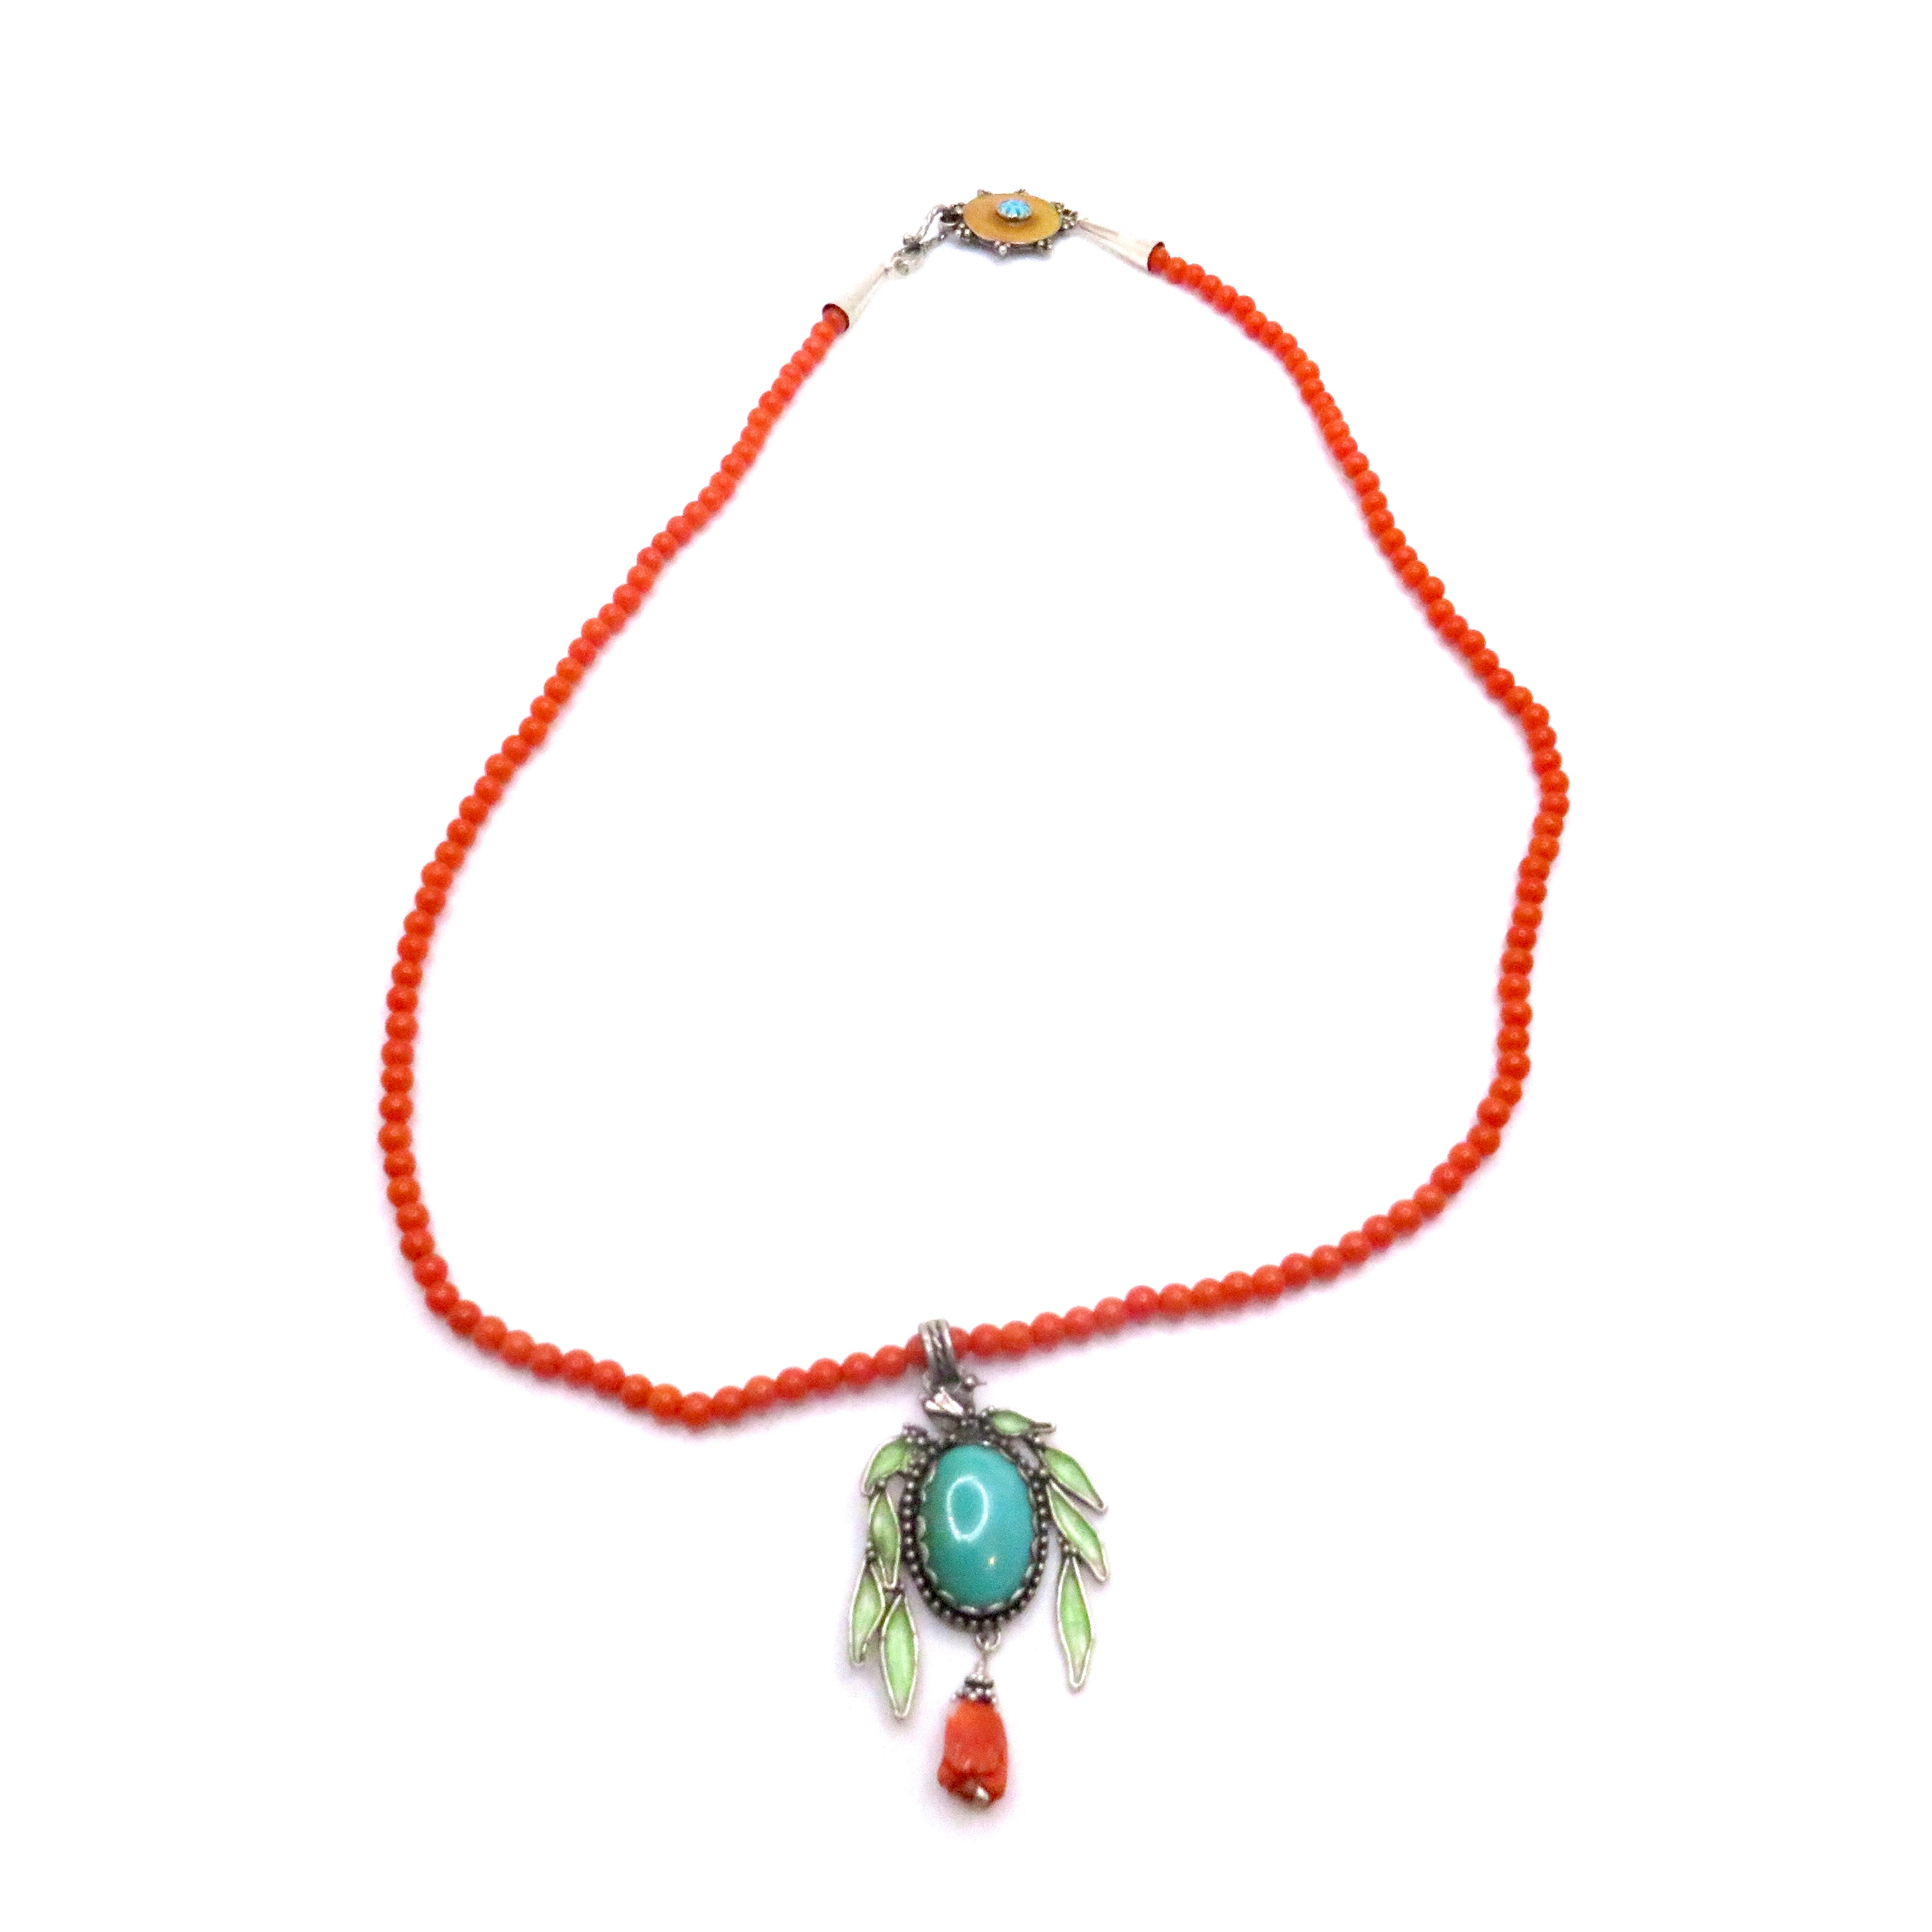 Coral, Turquoise, and Enamel Leaves Necklace